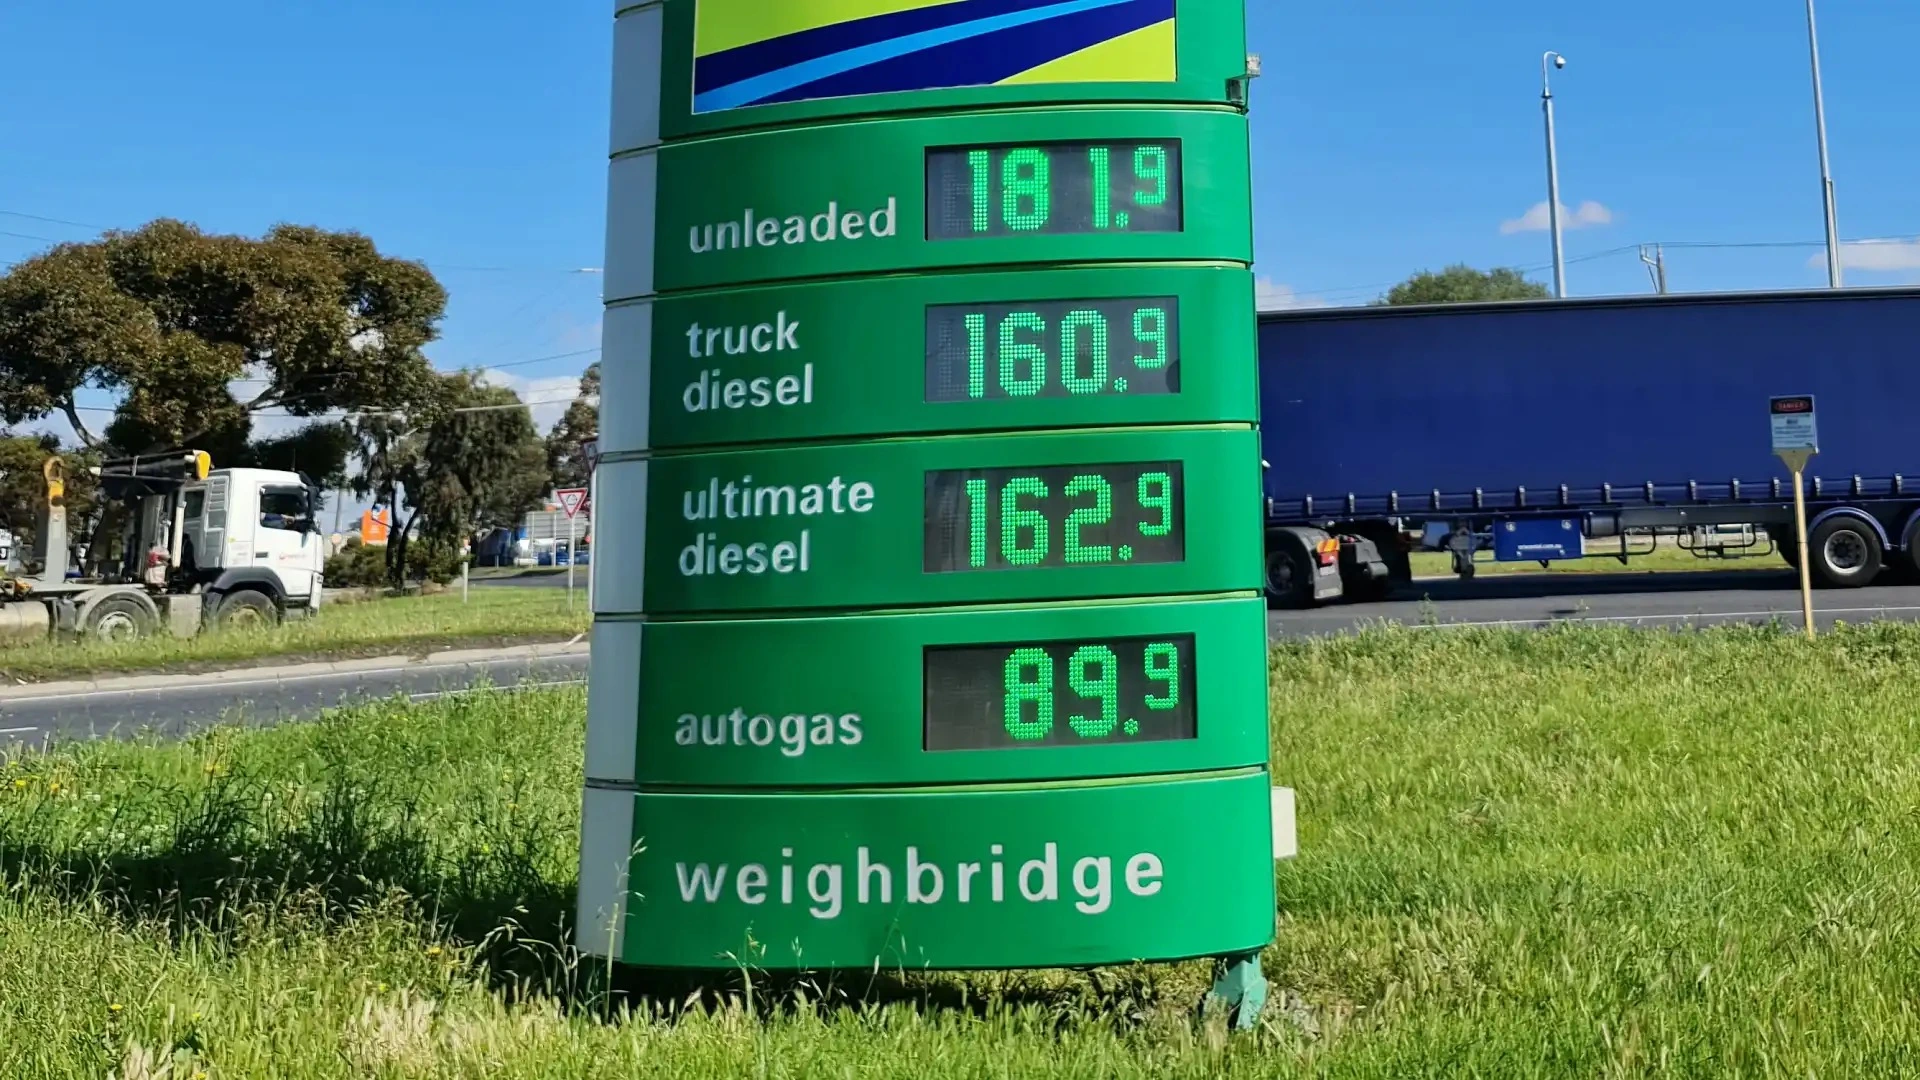 Green gas station sign displaying prices for various types of fuel including Unleaded, Truck Diesel, Ultimate Diesel, and Autogas, with a blue truck passing by in the background